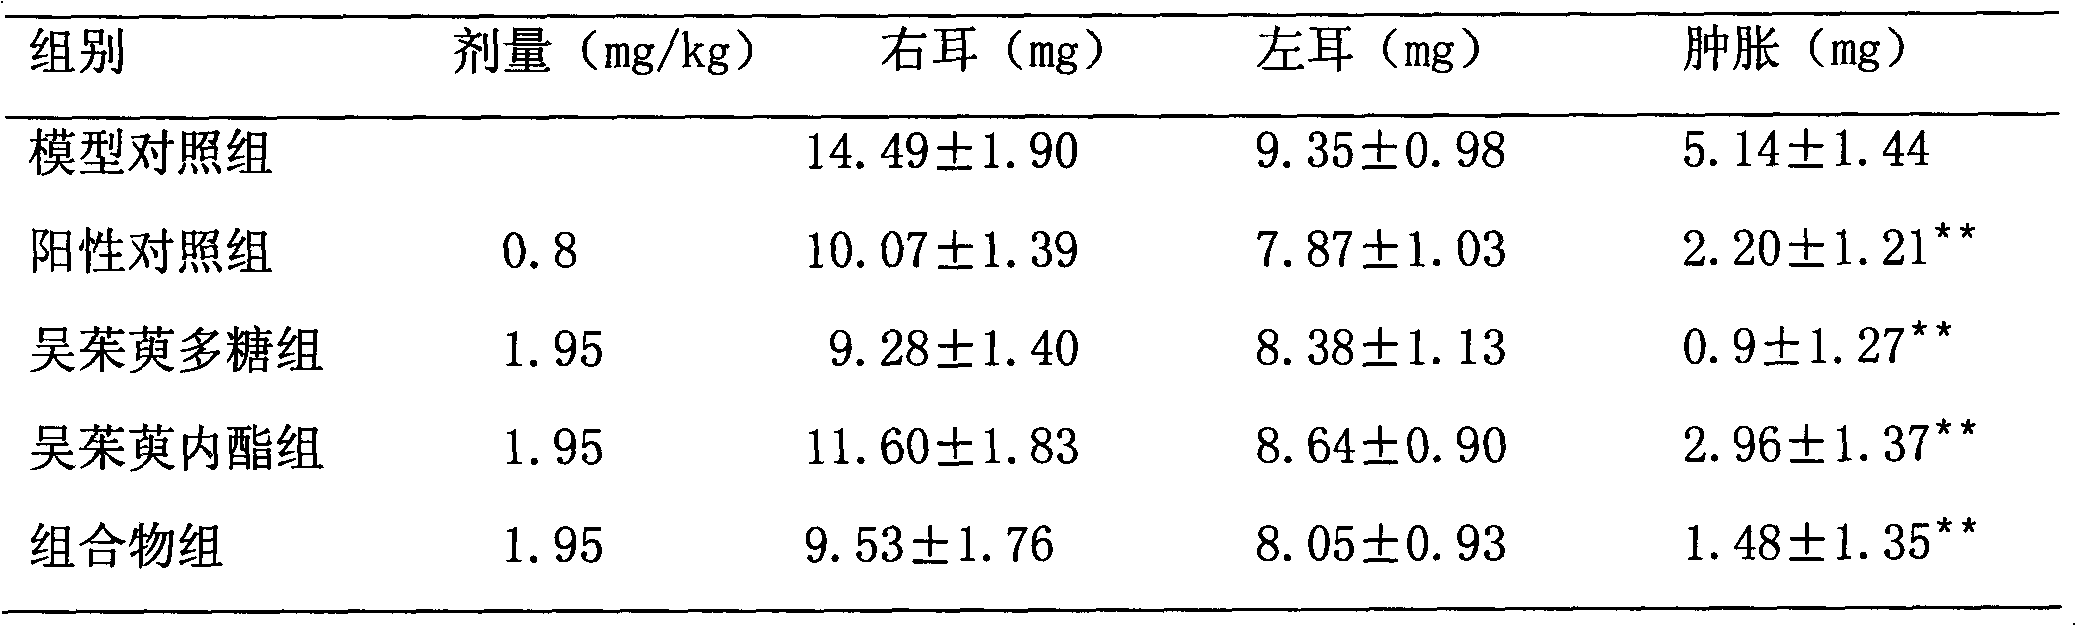 Medicinal evodia fruit lactone and polysaccharide extracts for treating digestive tract diseases, and preparation method and application thereof